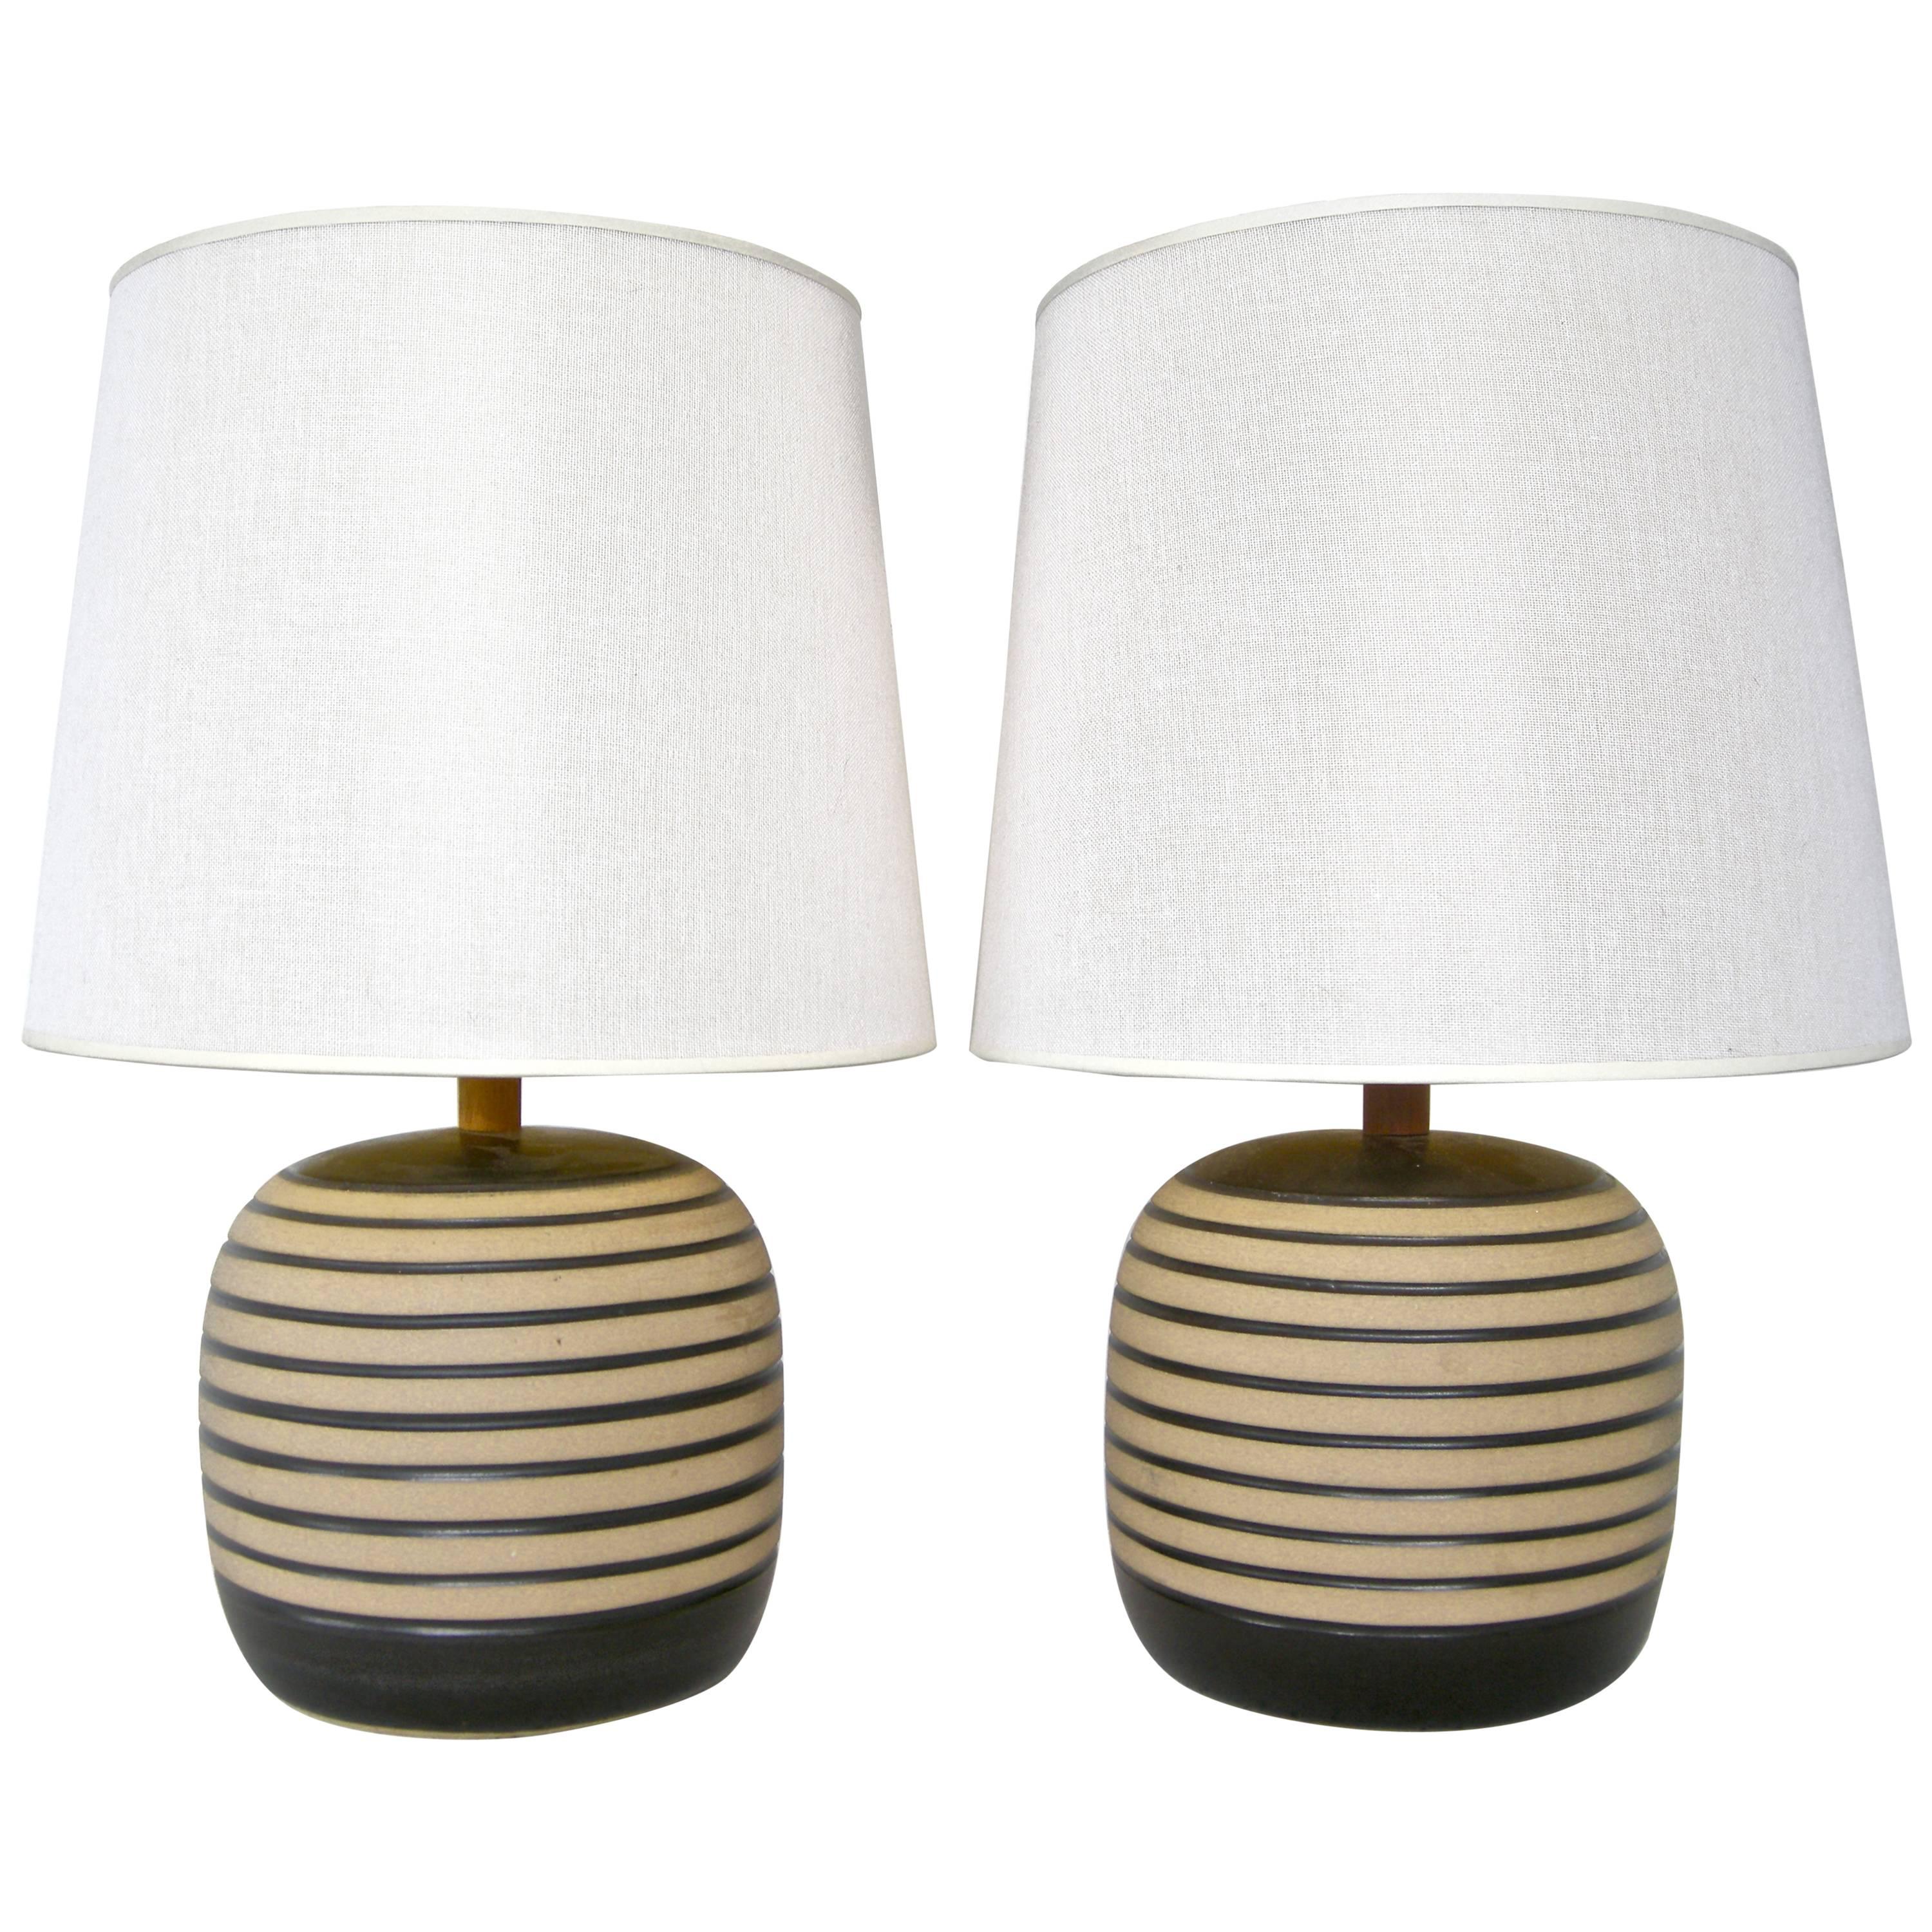 Pair of Graphic Martz Table Lights